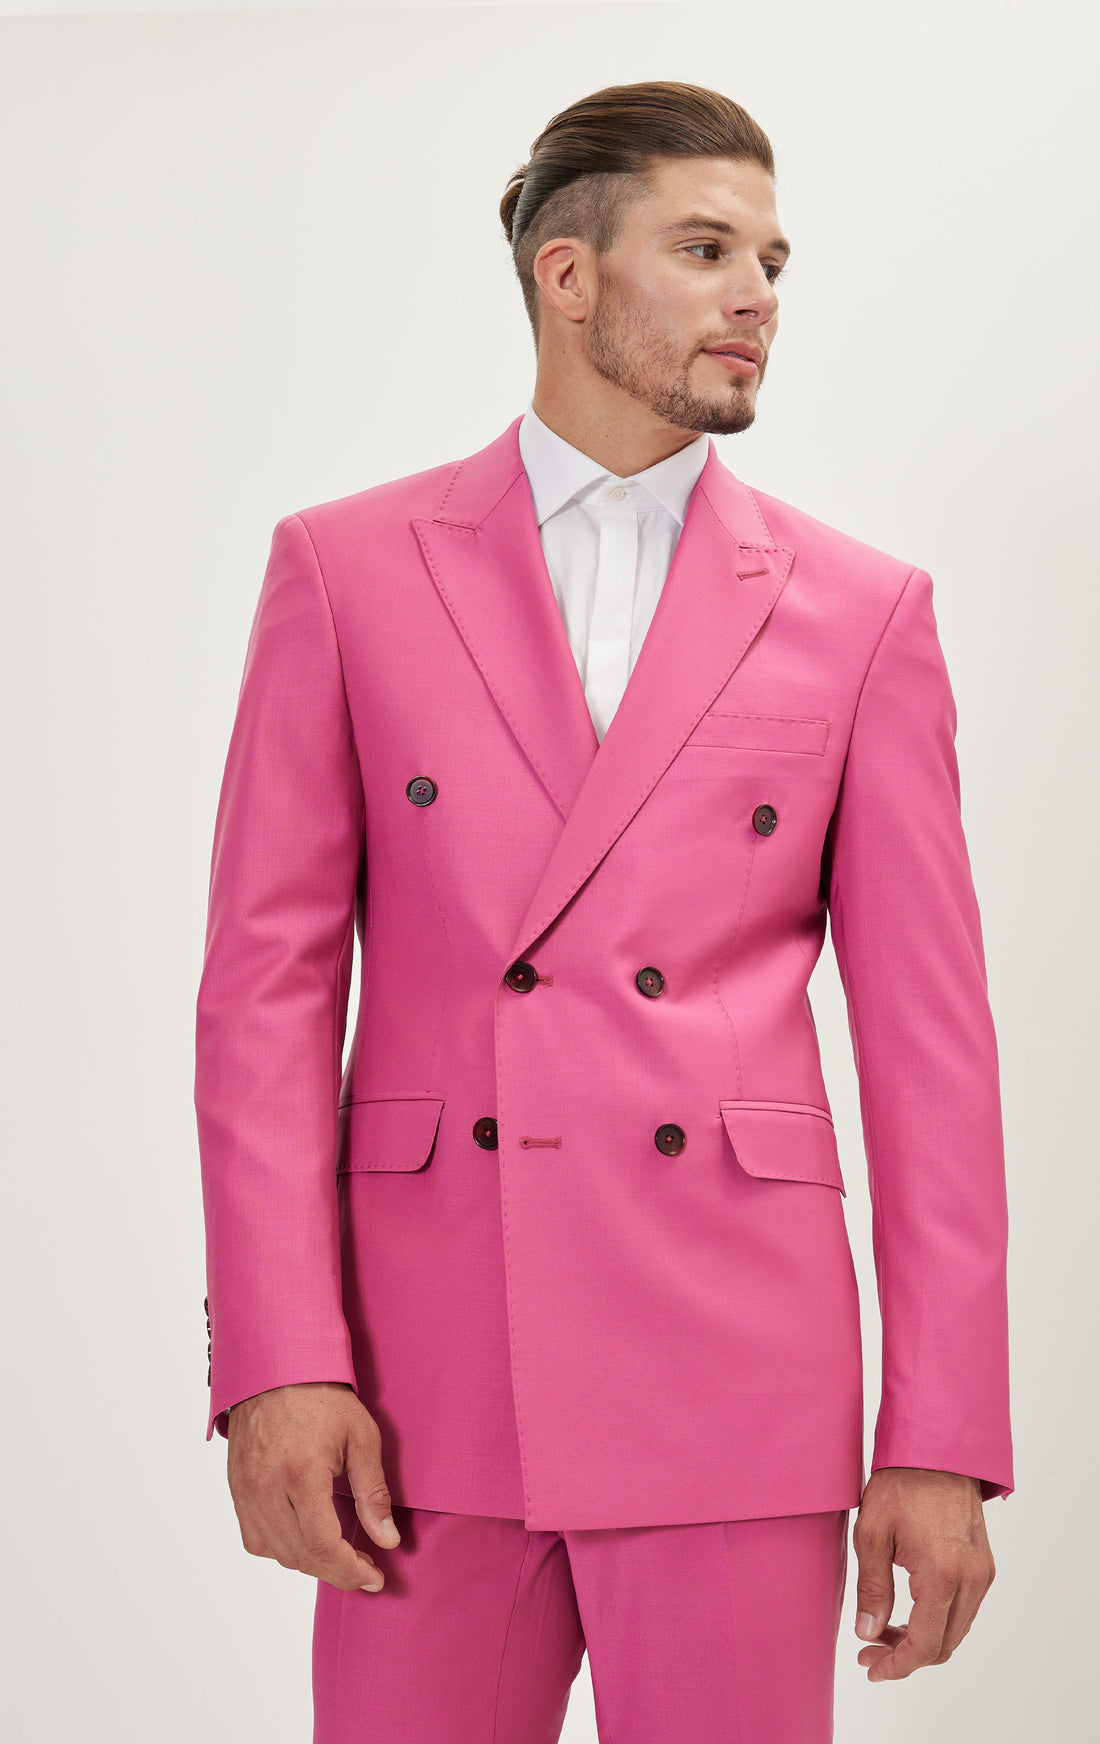 N° R206 SUPER 120S MERINO WOOL DOUBLE BREASTED SUIT - RASPBERRY PINK ISH RED